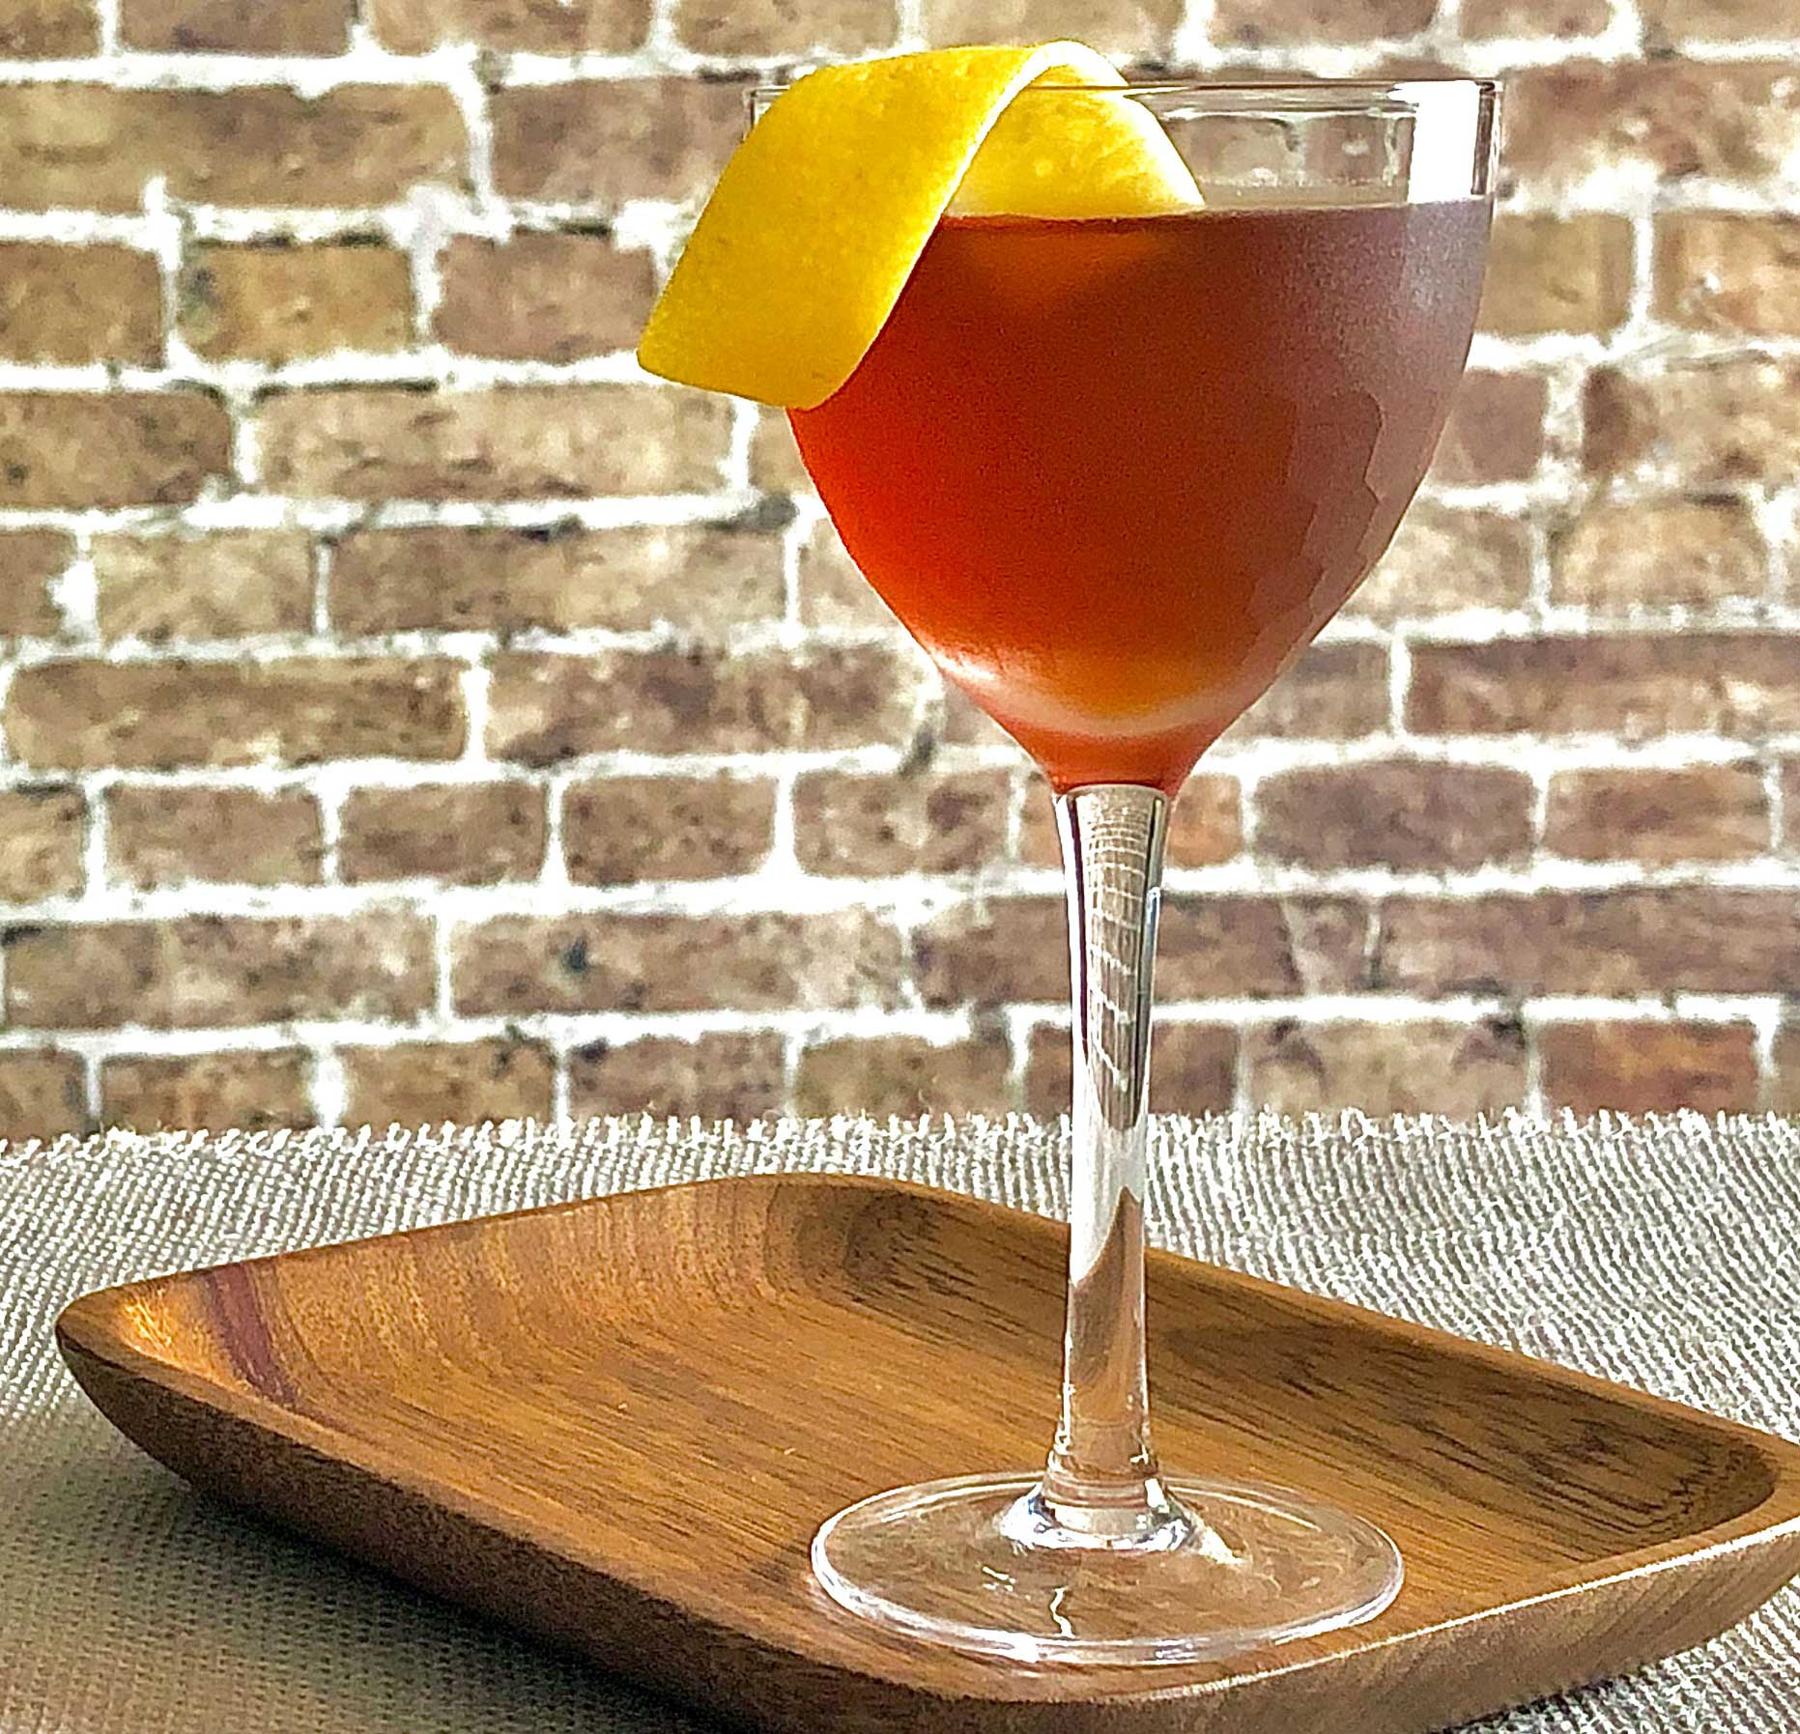 An example of the Fort Point, the mixed drink (drink), by Erik Adkins, Heaven’s Dog, San Francisco, featuring rye whiskey, Cocchi Barolo Chinato, Rothman & Winter Orchard Apricot Liqueur, and lemon twist; photo by Lee Edwards